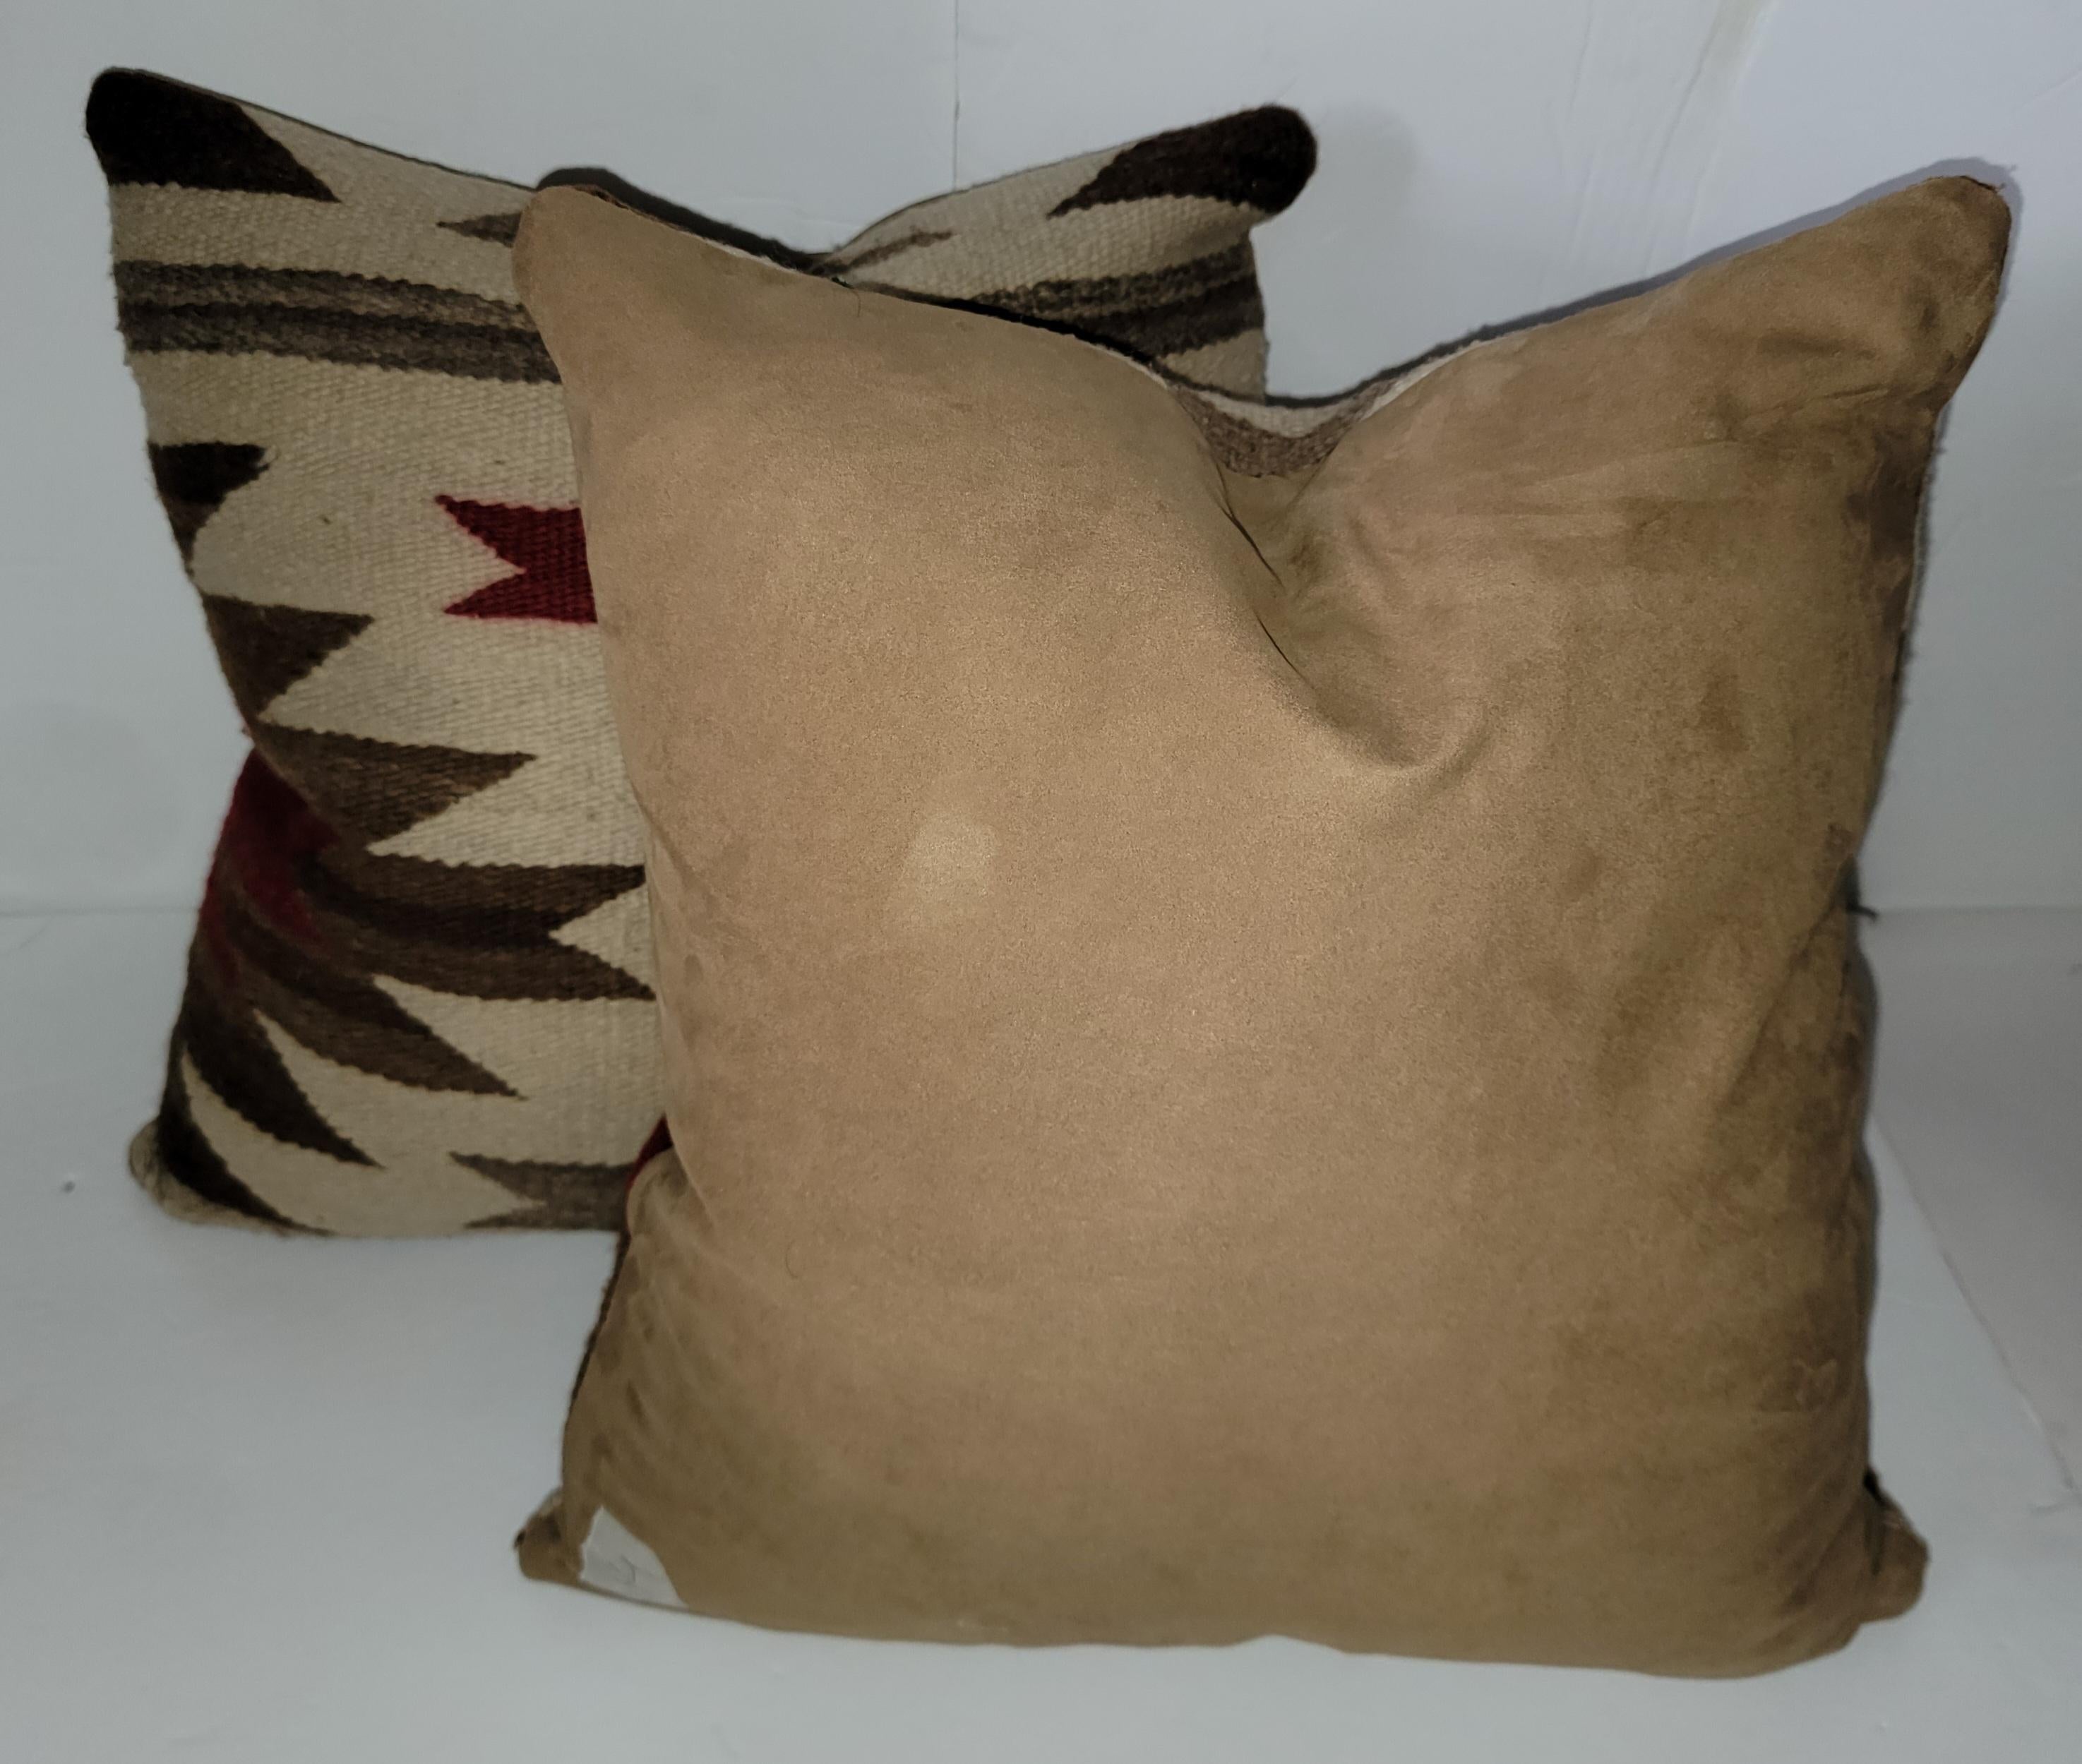 Navajo Indian weaving pillows - pair. Camel suede backing. Feather and down inserts and zippered case

Measures: 15 x 16 
15 x 15